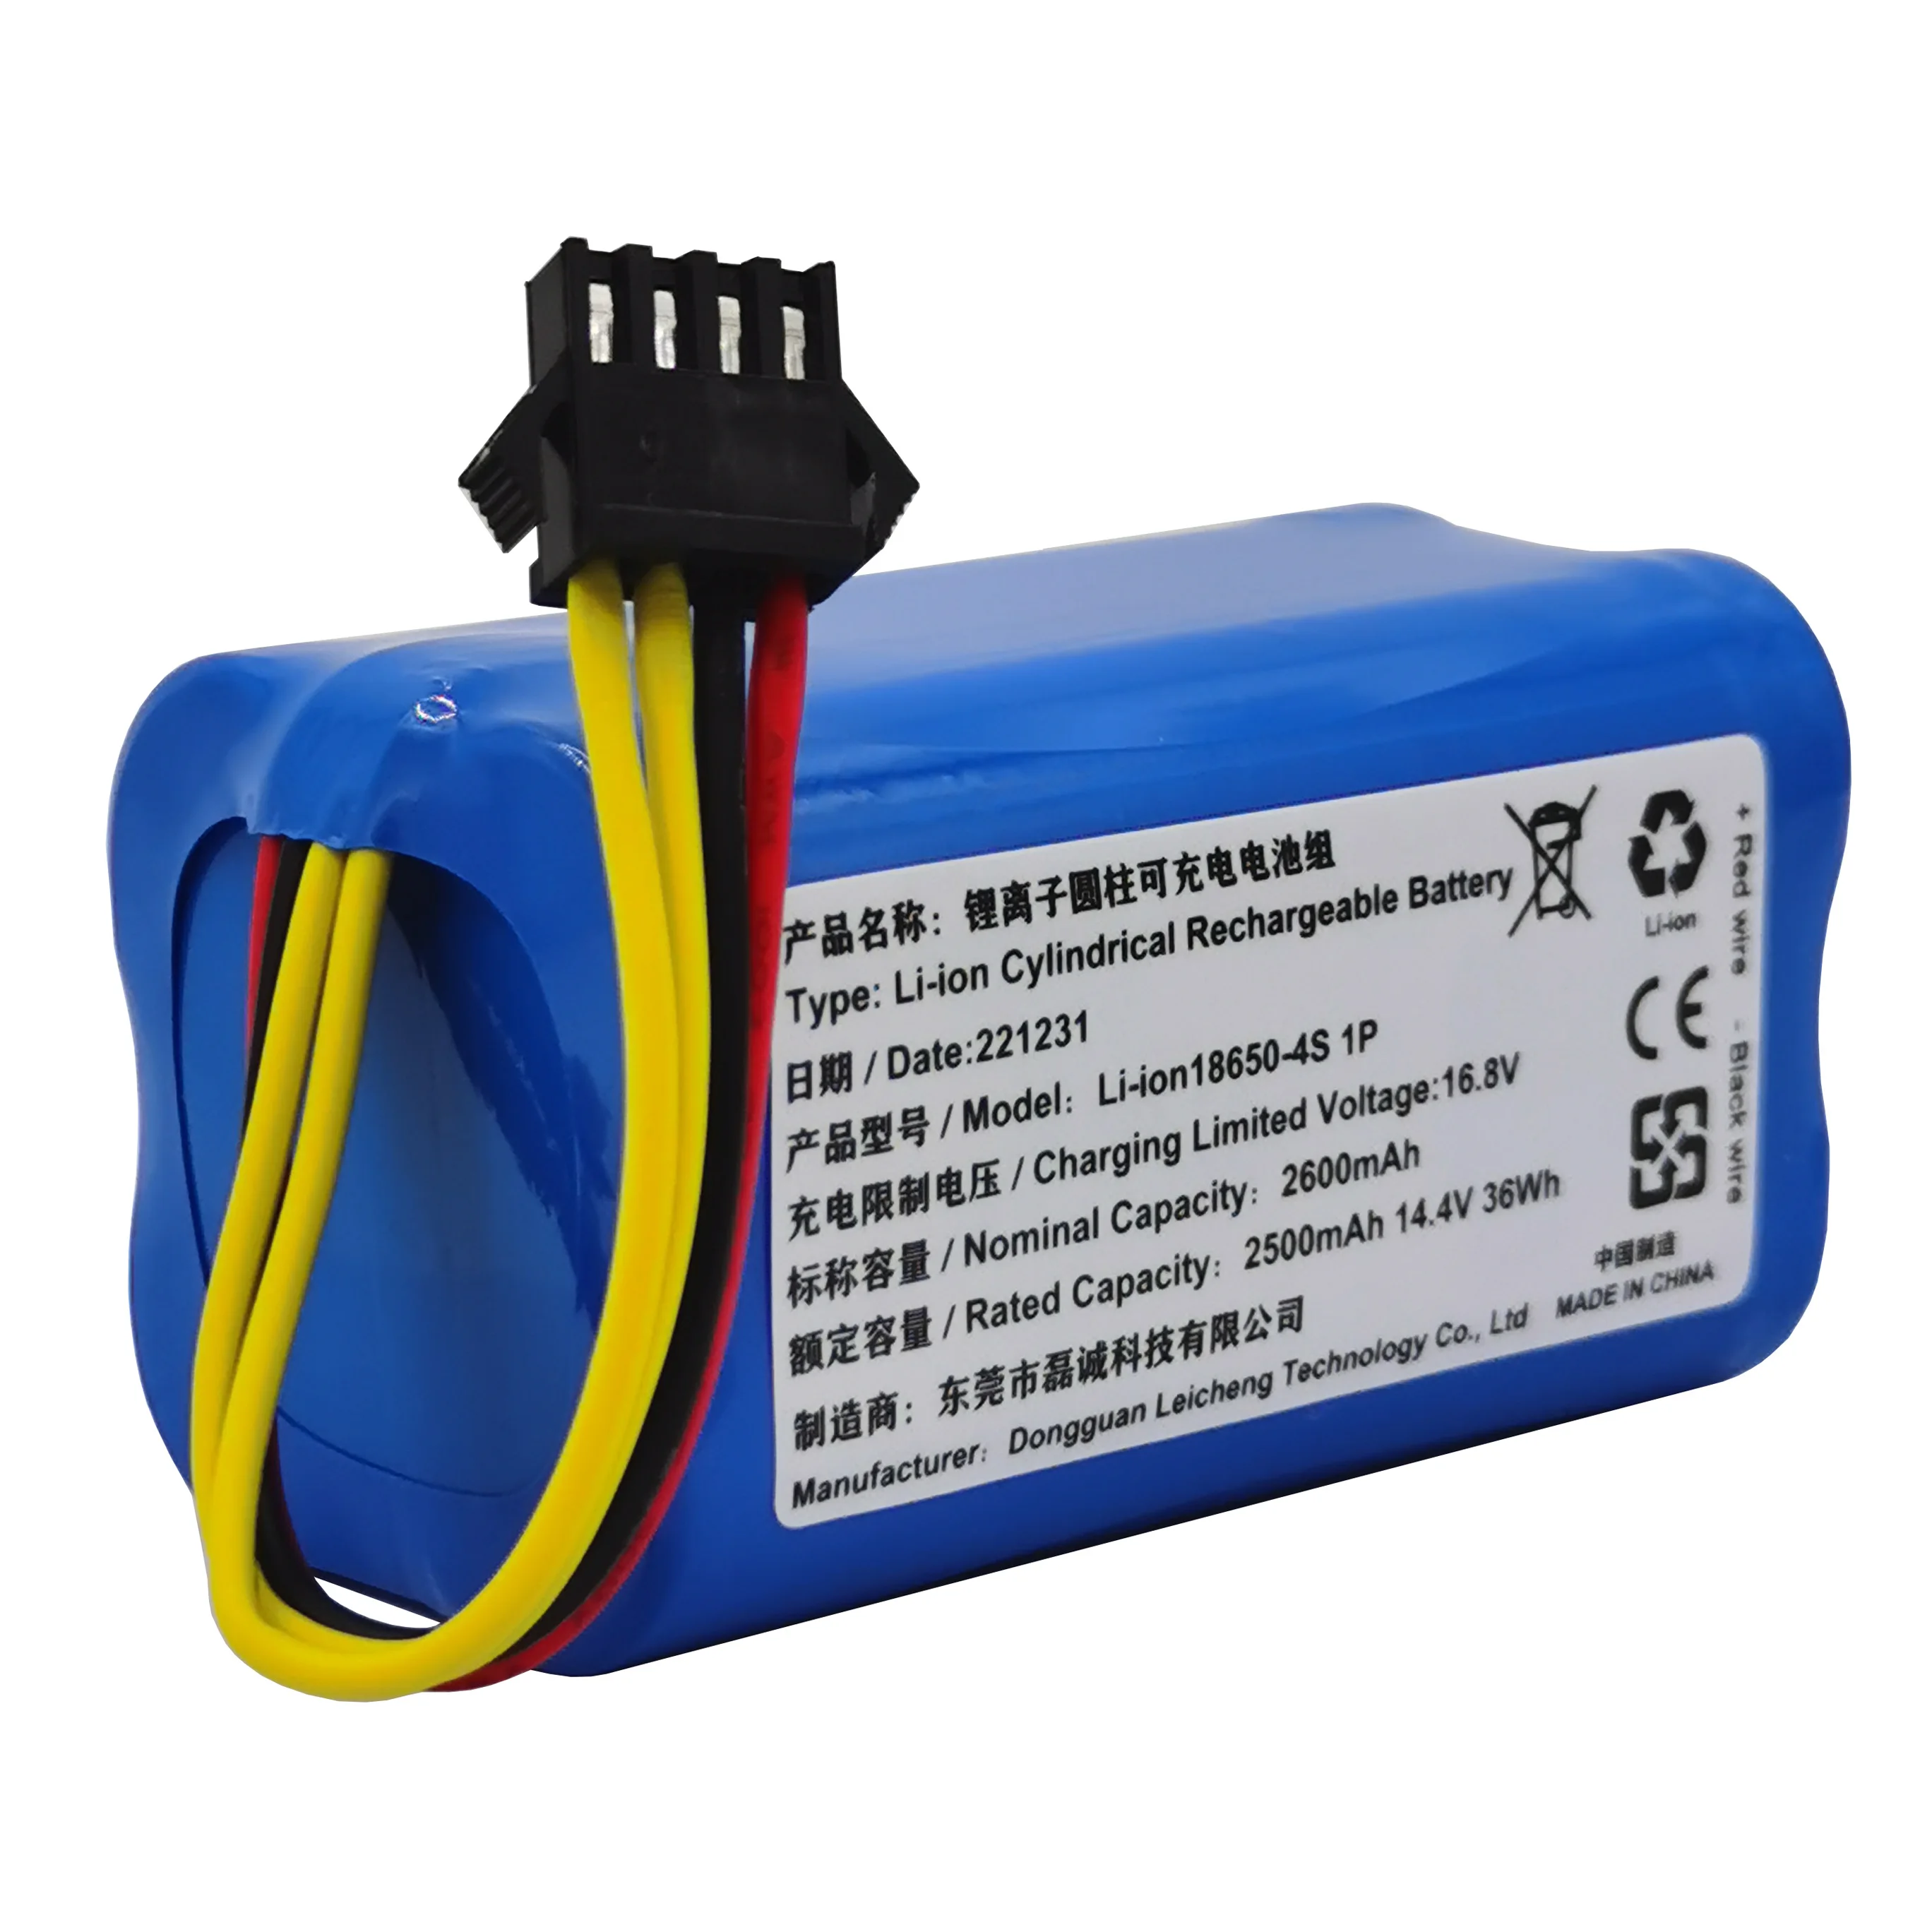 

14.4V 14.8V 3500mAh 2600mAh Li-Ion Cylindrical Rechargeable Battery Pack For Haier Sweeping Robot TB33 TB35 WOTN-J340P C340BL 06